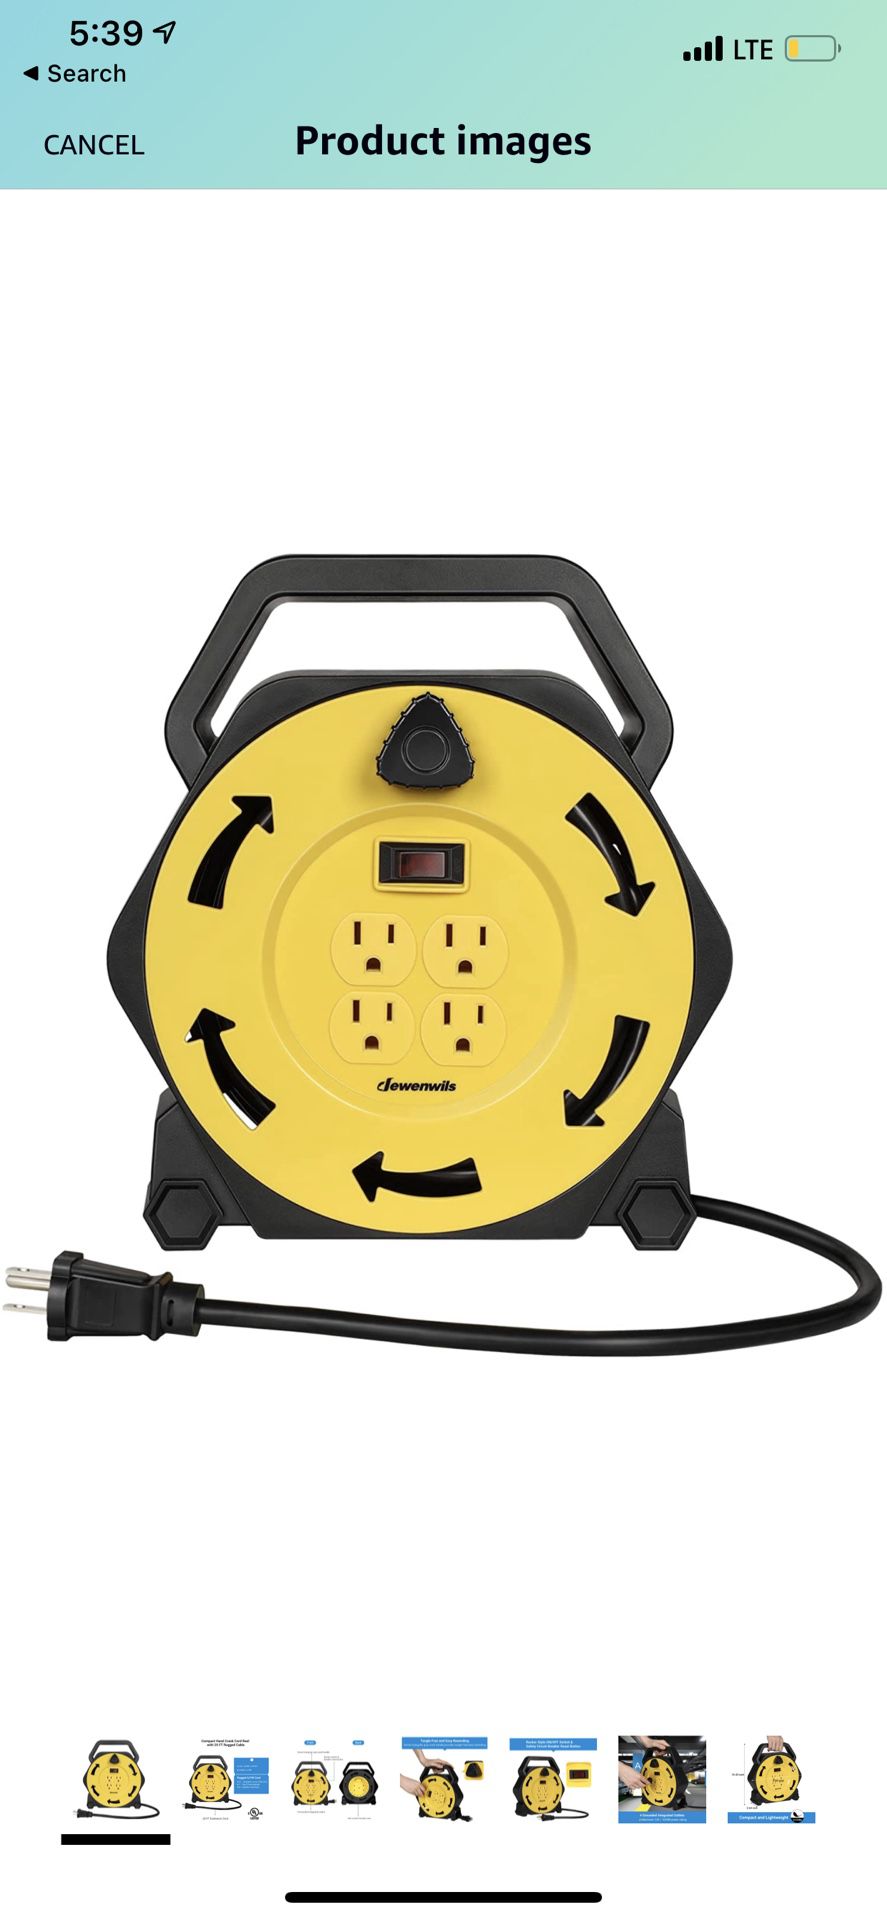 DEWENWILS Extension Cord Reel with 25 FT Power Cord, Hand Wind Retractable, 16/3 AWG SJTW, 4 Grounded Outlets, 13 Amp Circuit Breaker, Yellow, Black, 